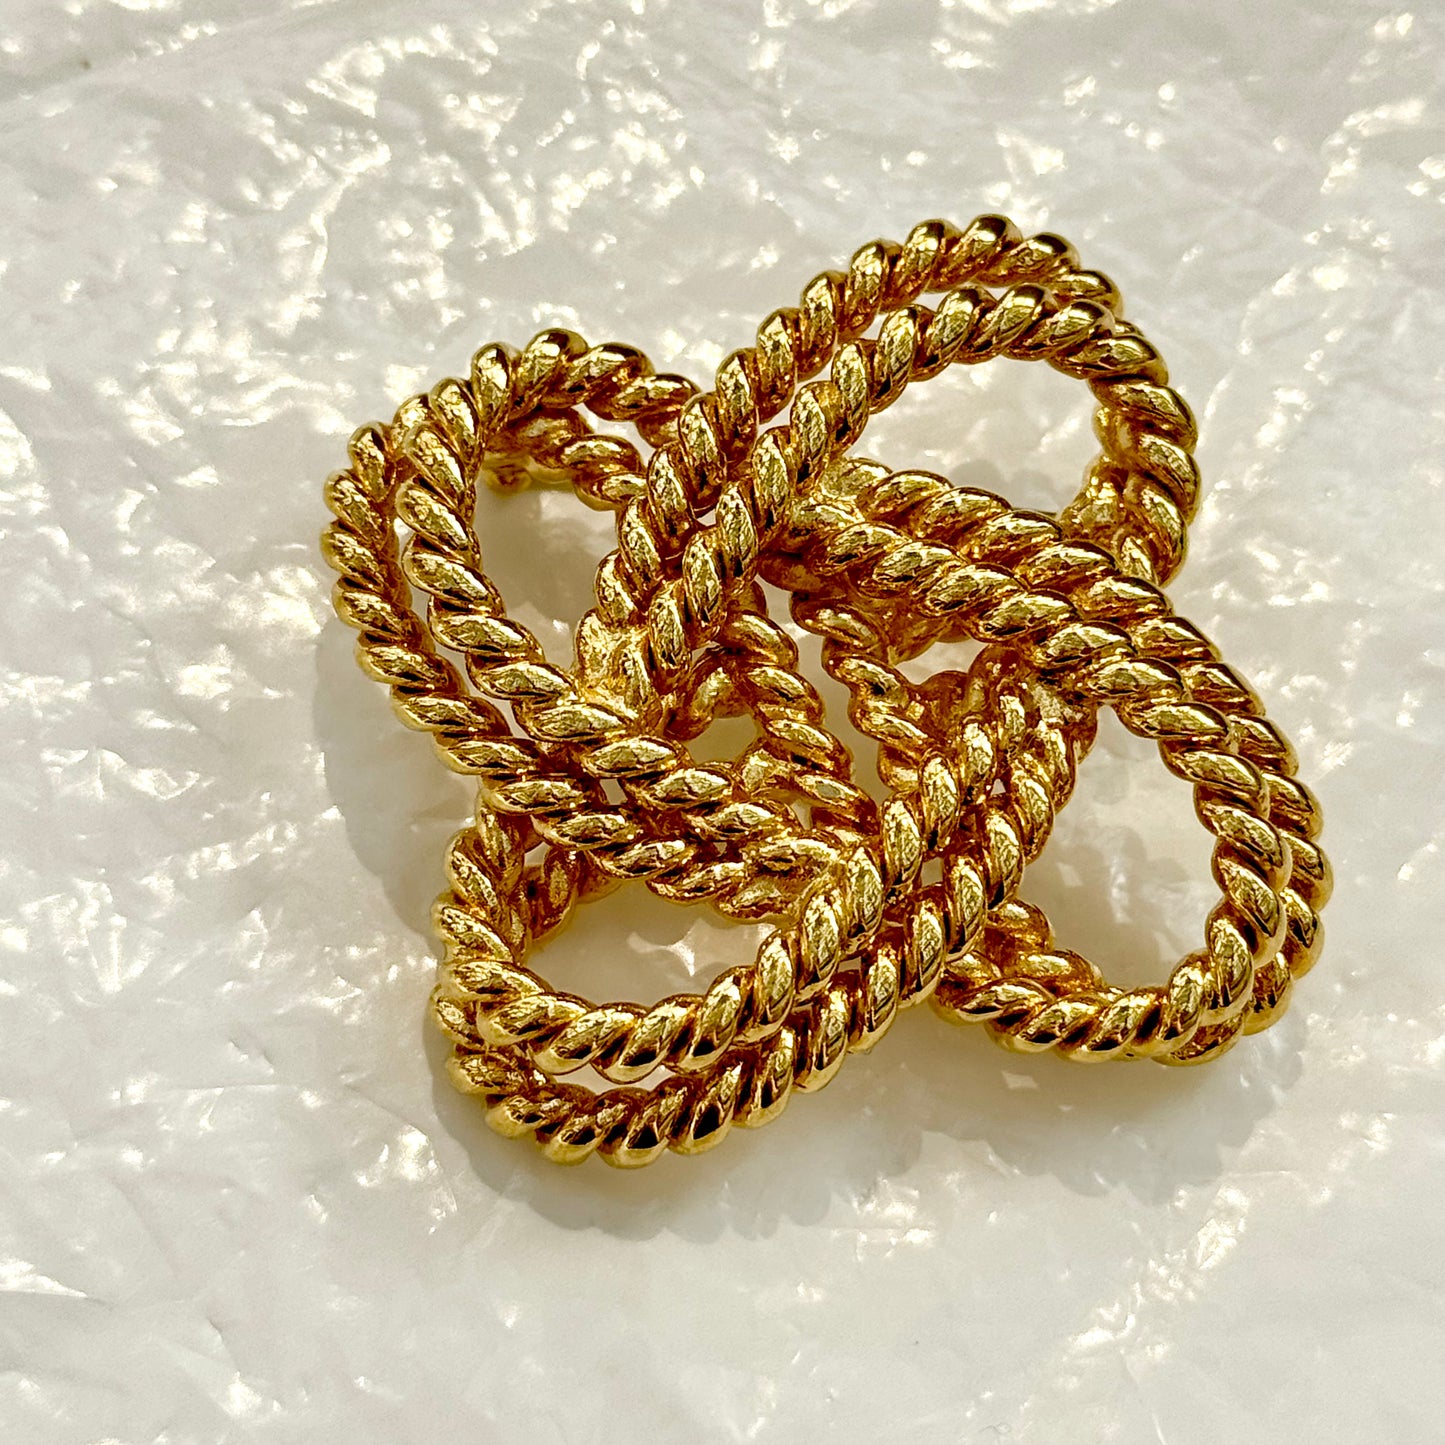 Knotted ropes brooch